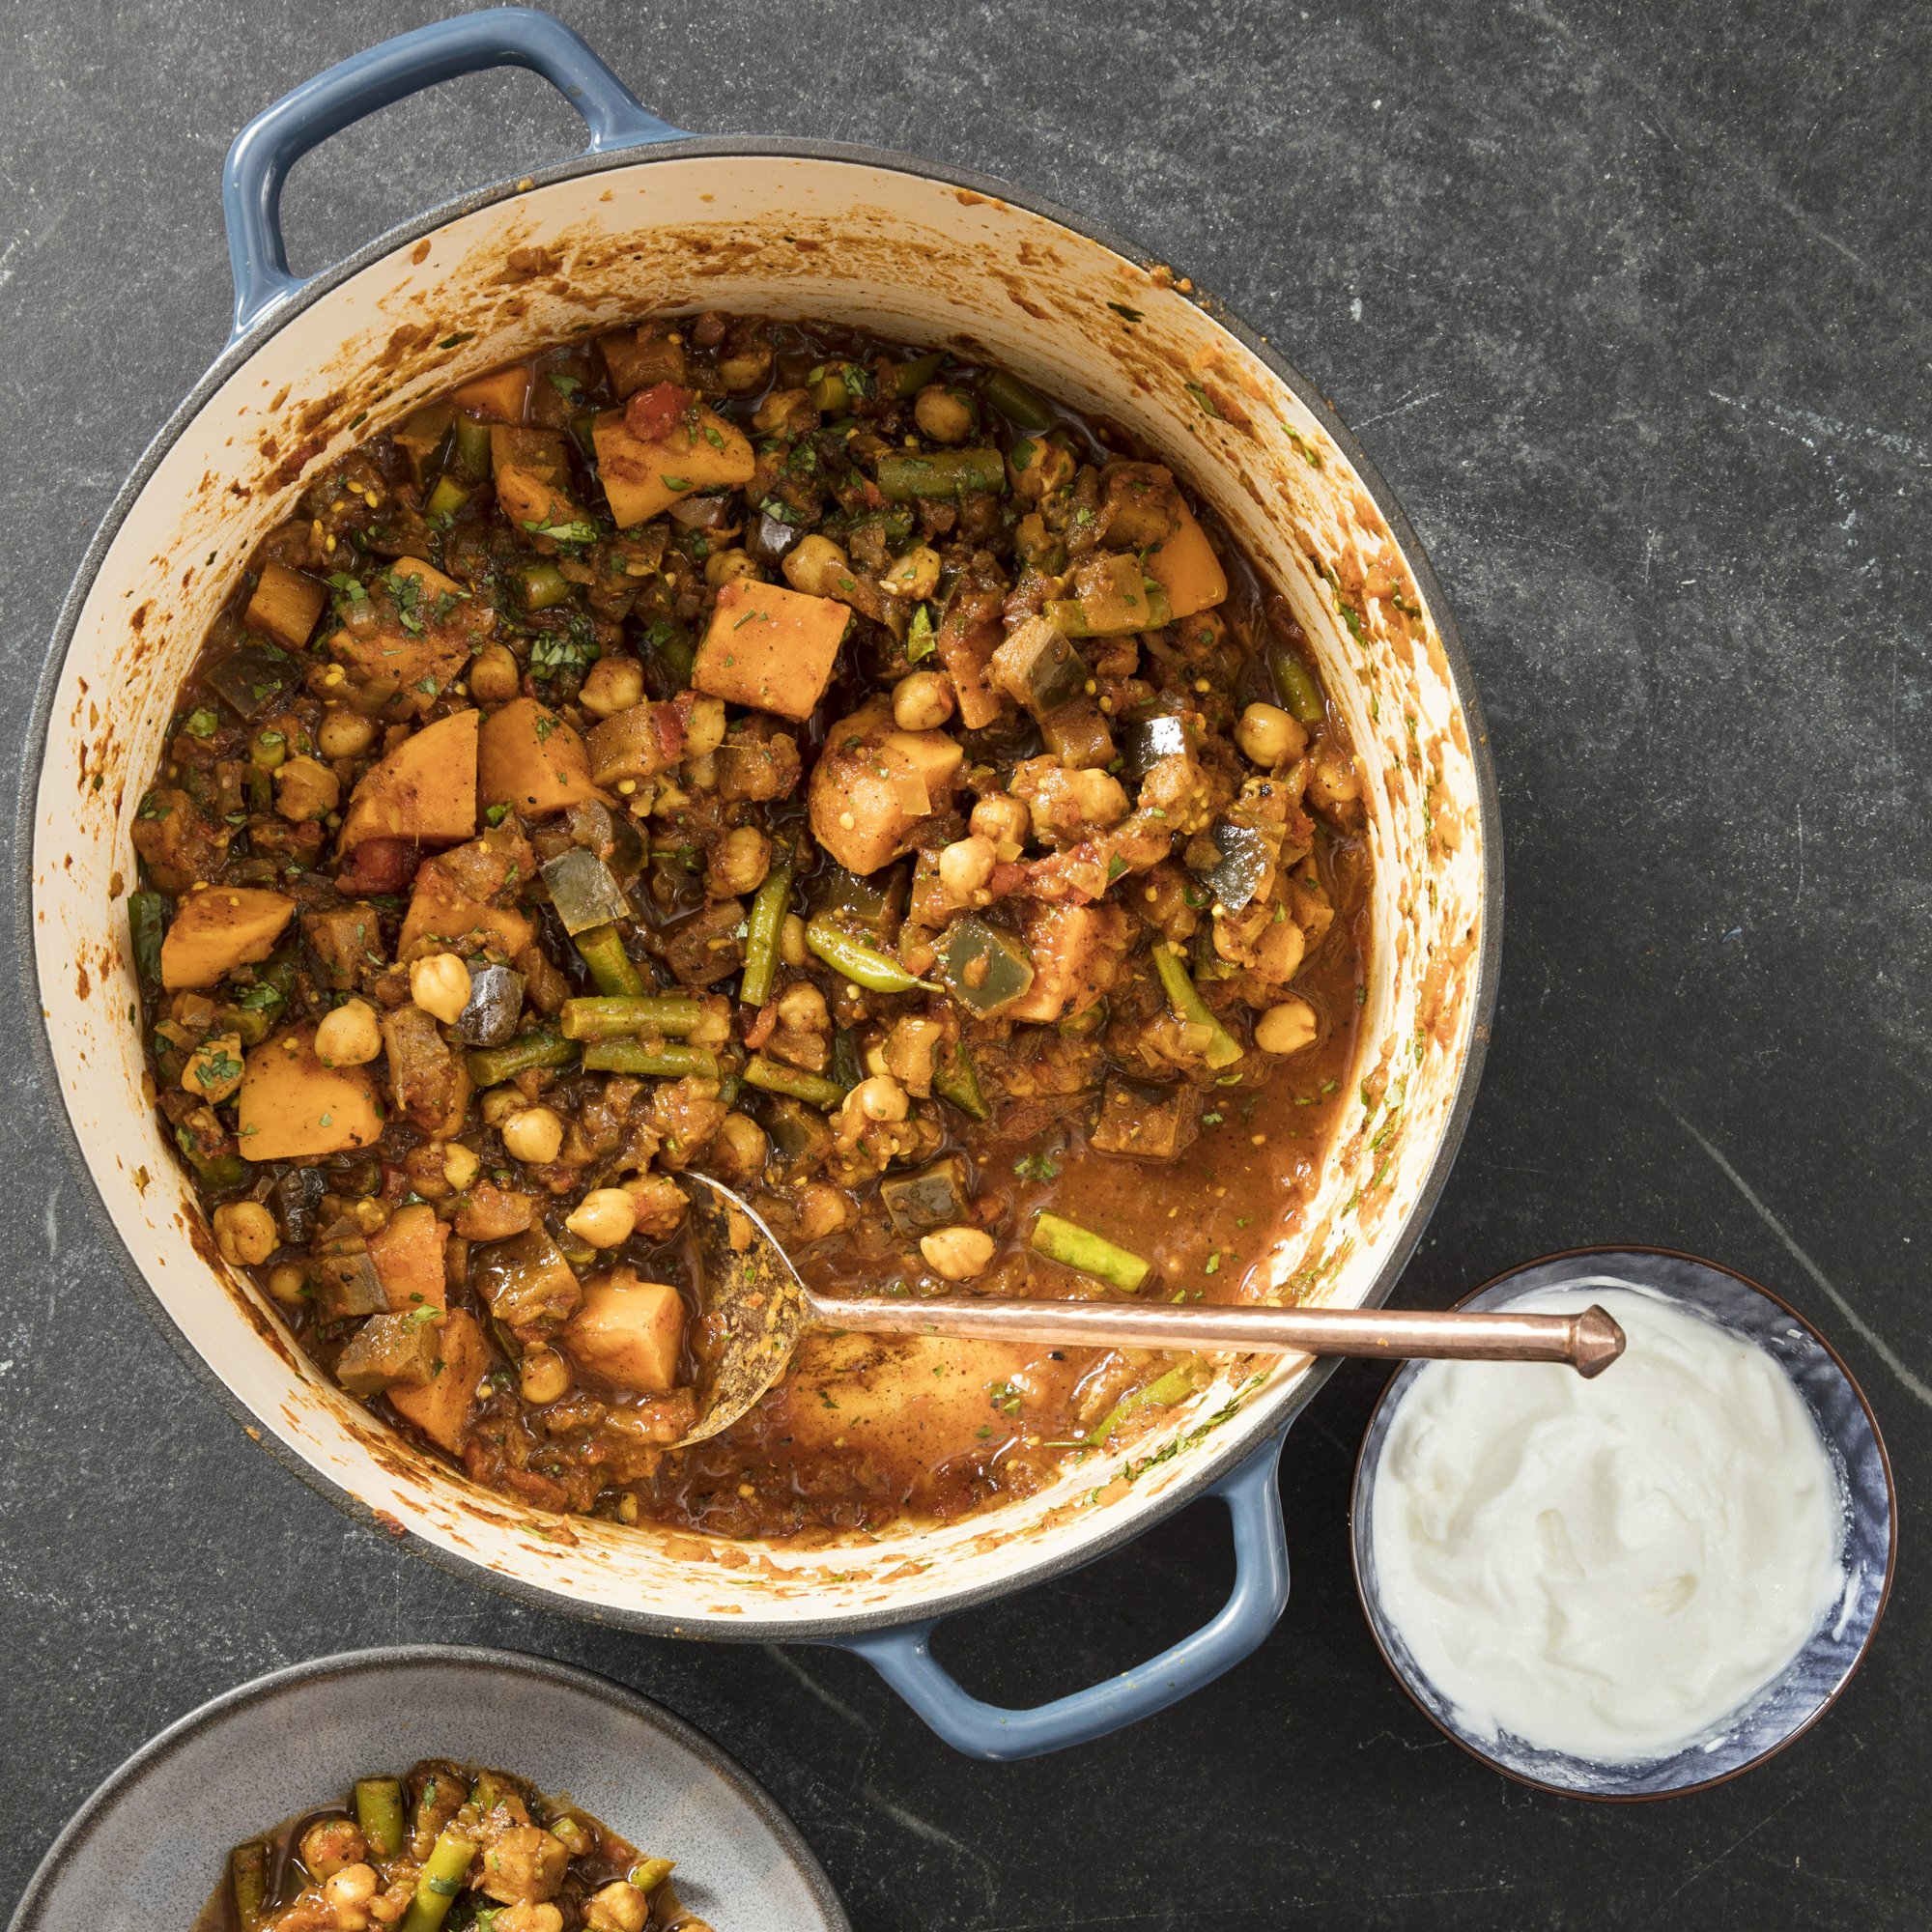 This vegetable curry has bold flavors to keep everyone happy